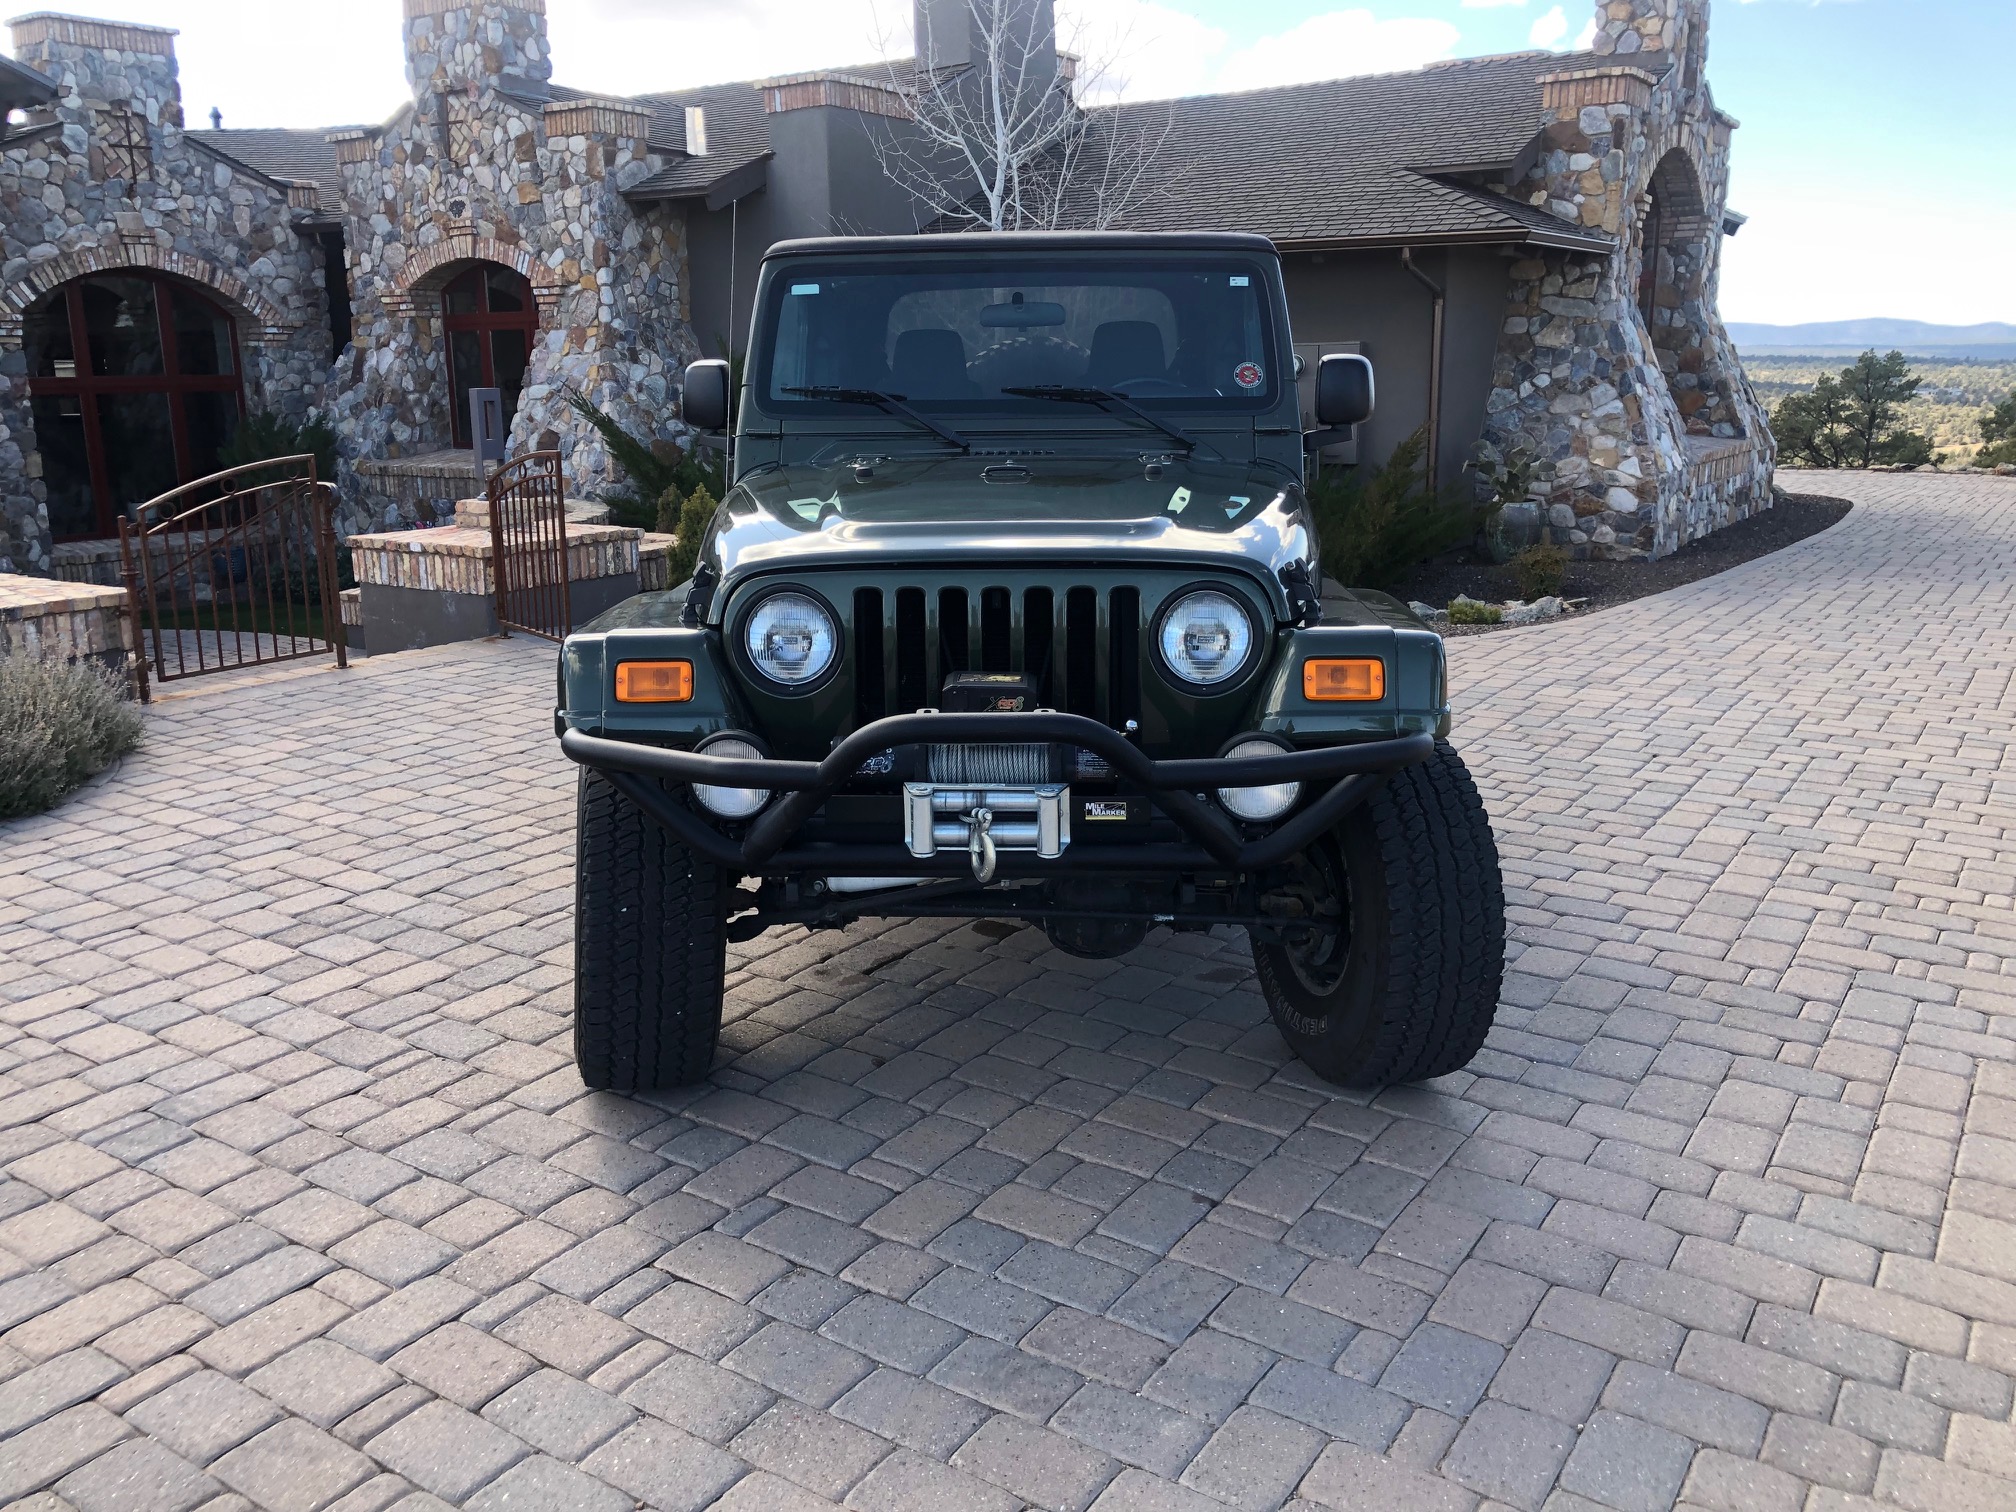 This 2006 Jeep Wrangler Is the Best Worst Car I've Ever Driven - Autotrader